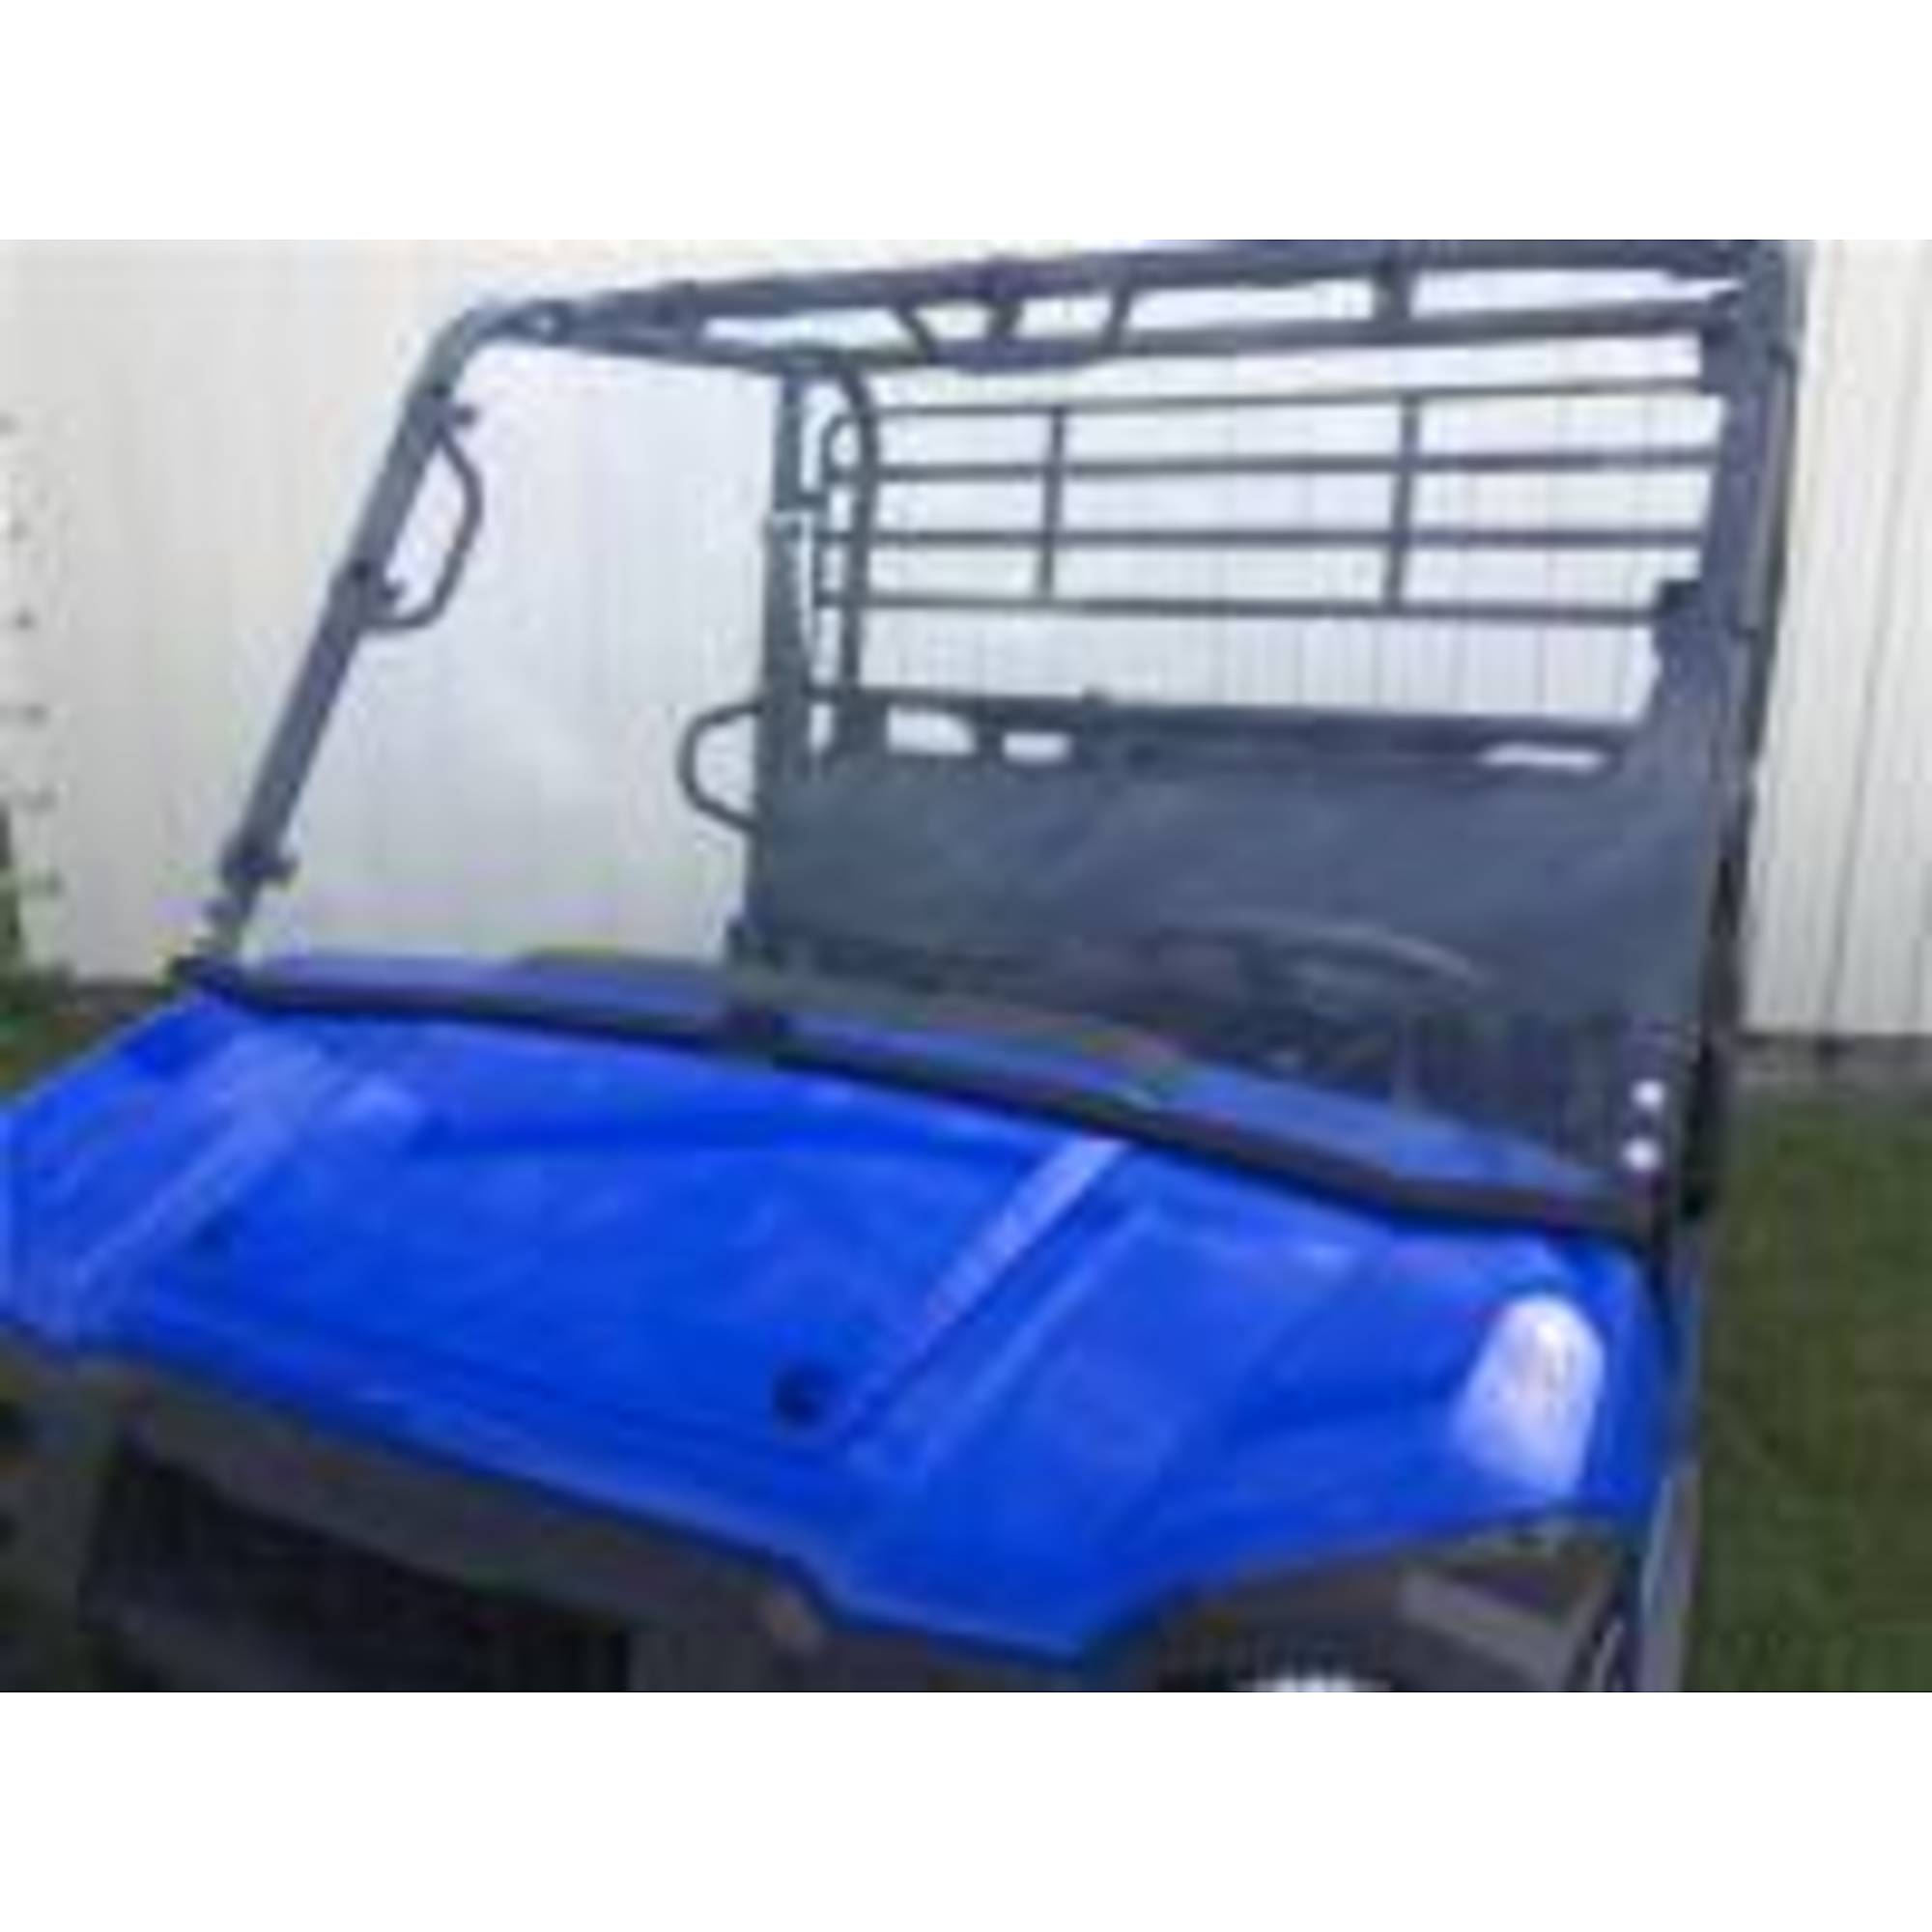 Extreme Metal Products, Mule Pro FX/FXT Windshield, Model 13439